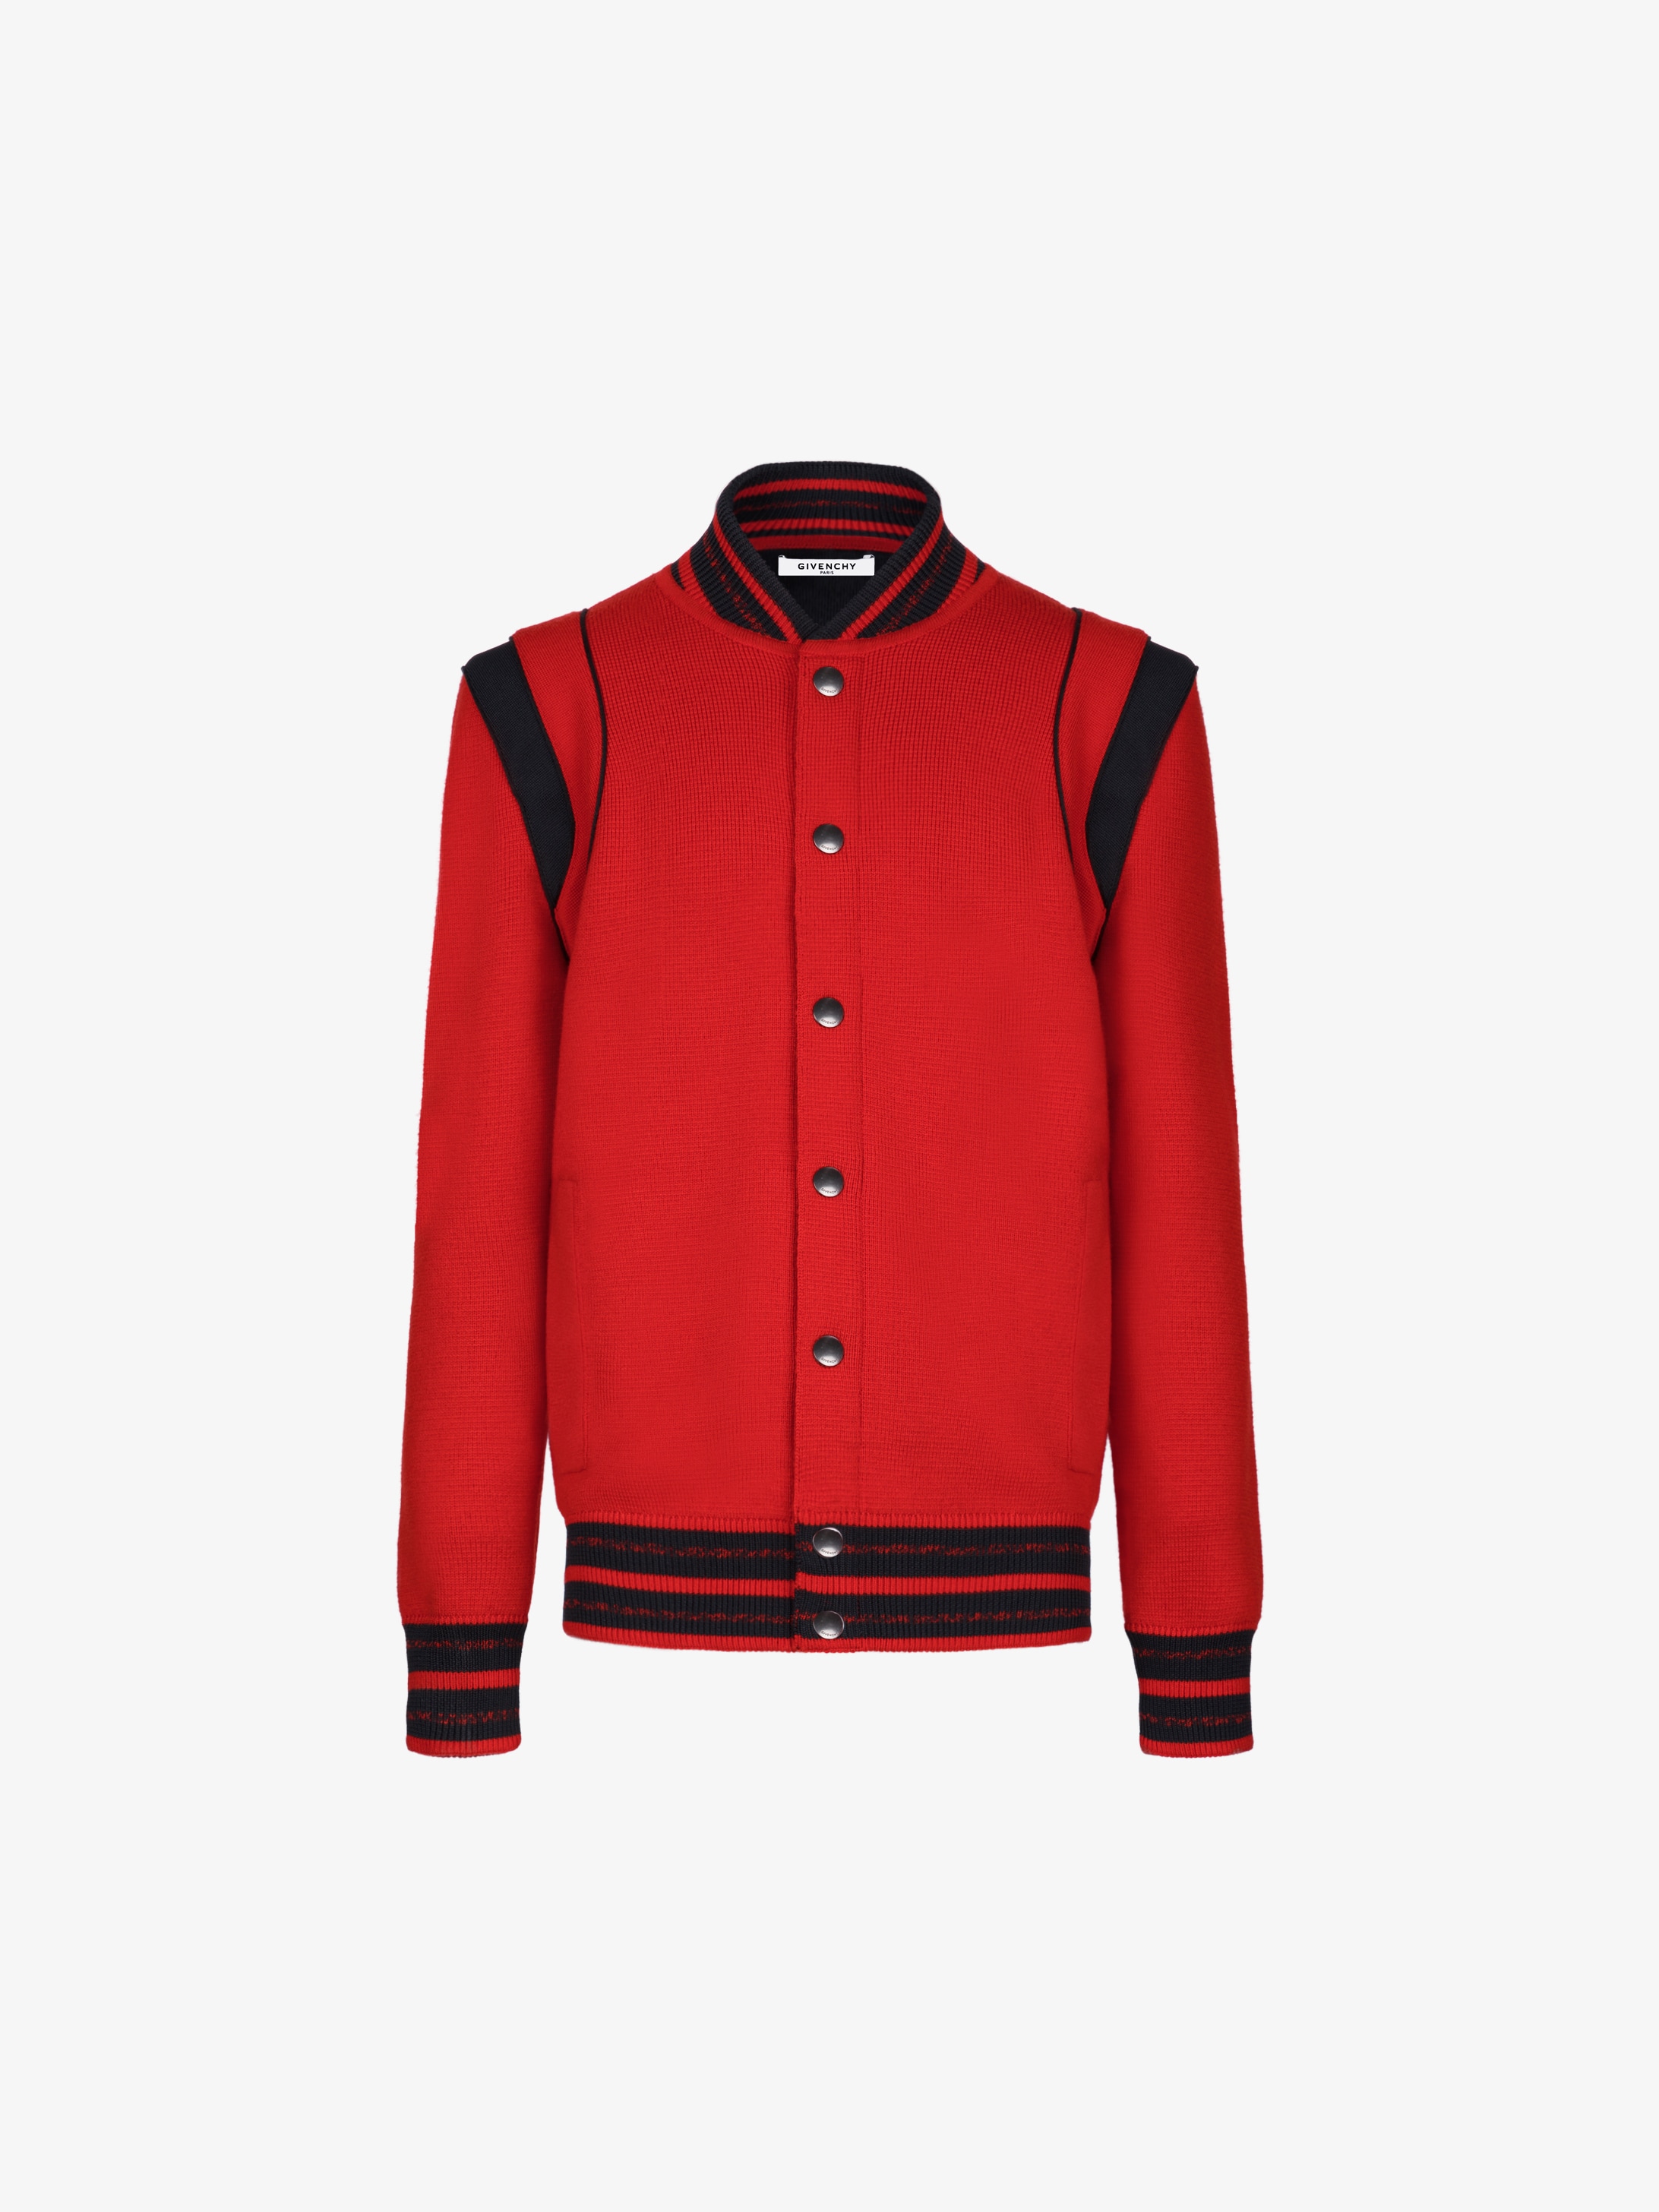 givenchy red jacket